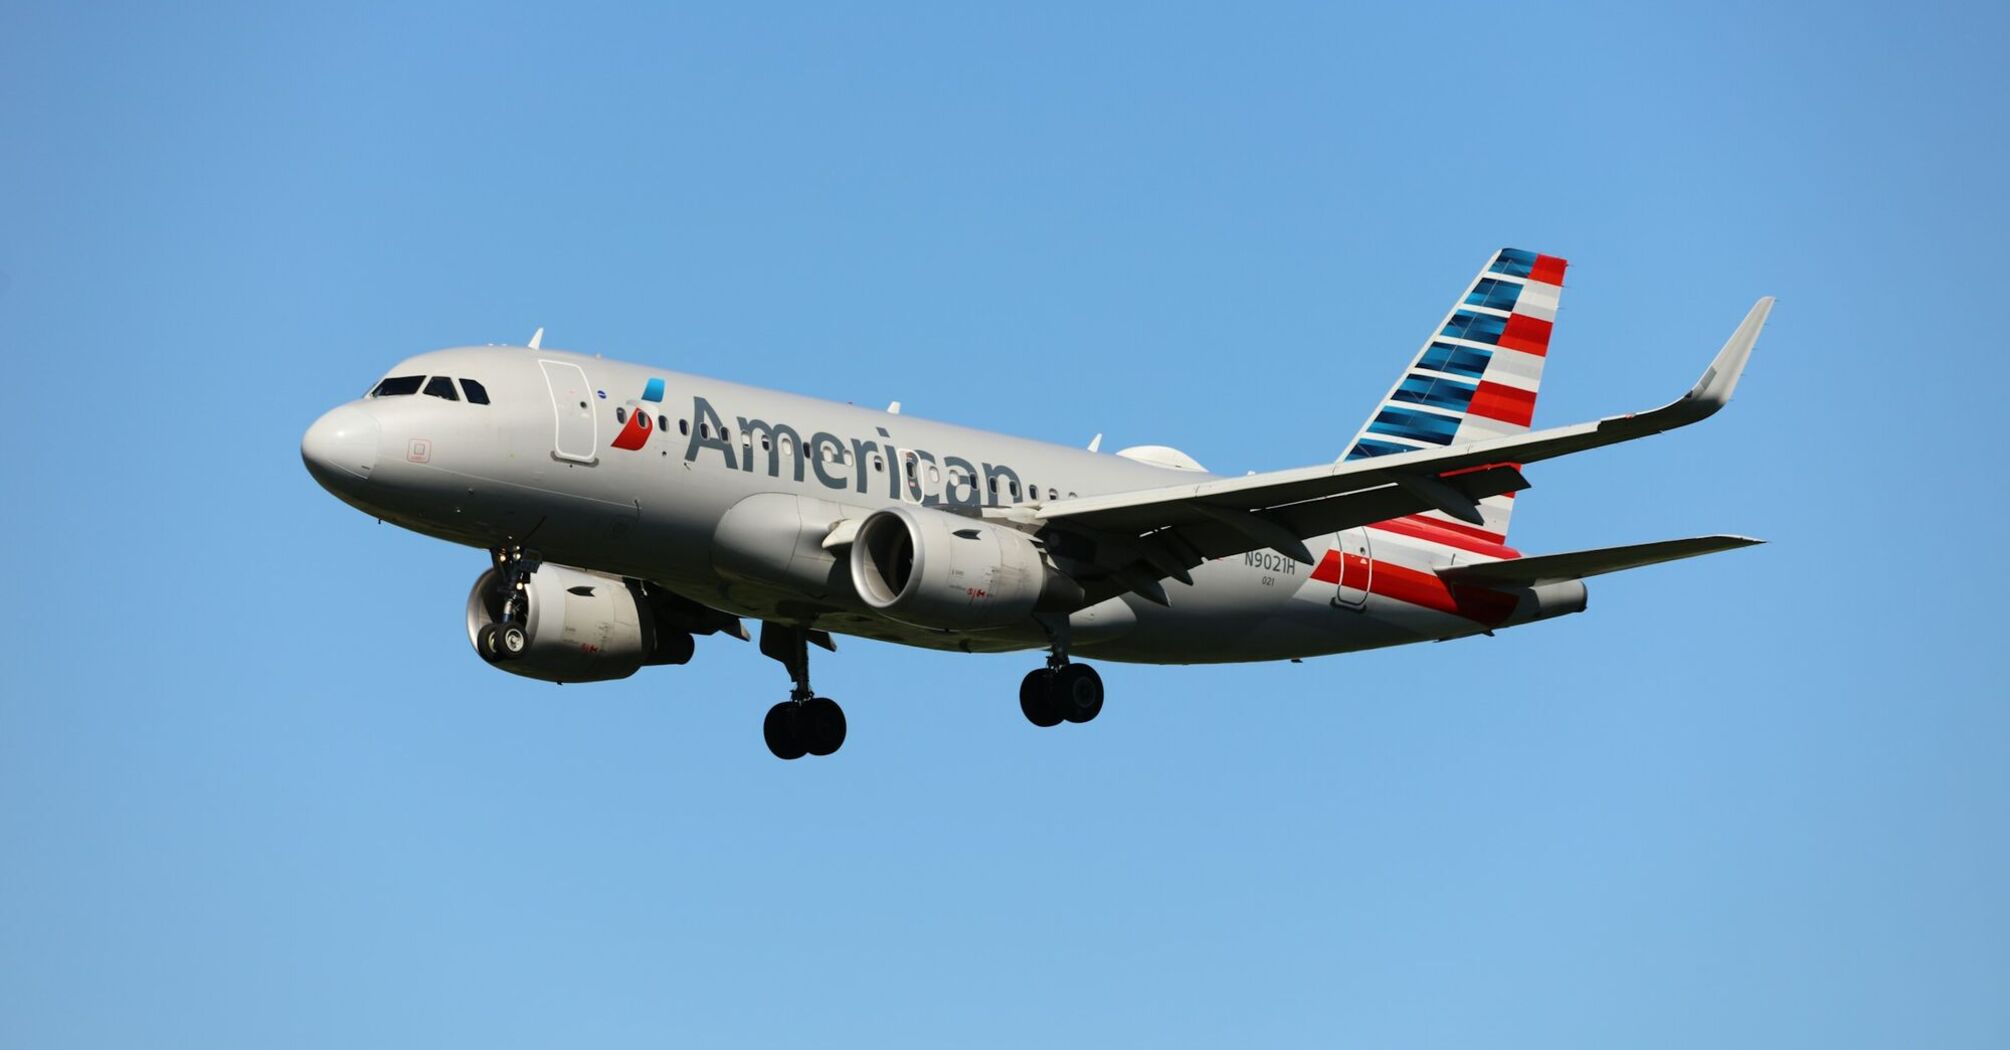 American Airlines aircraft in flight